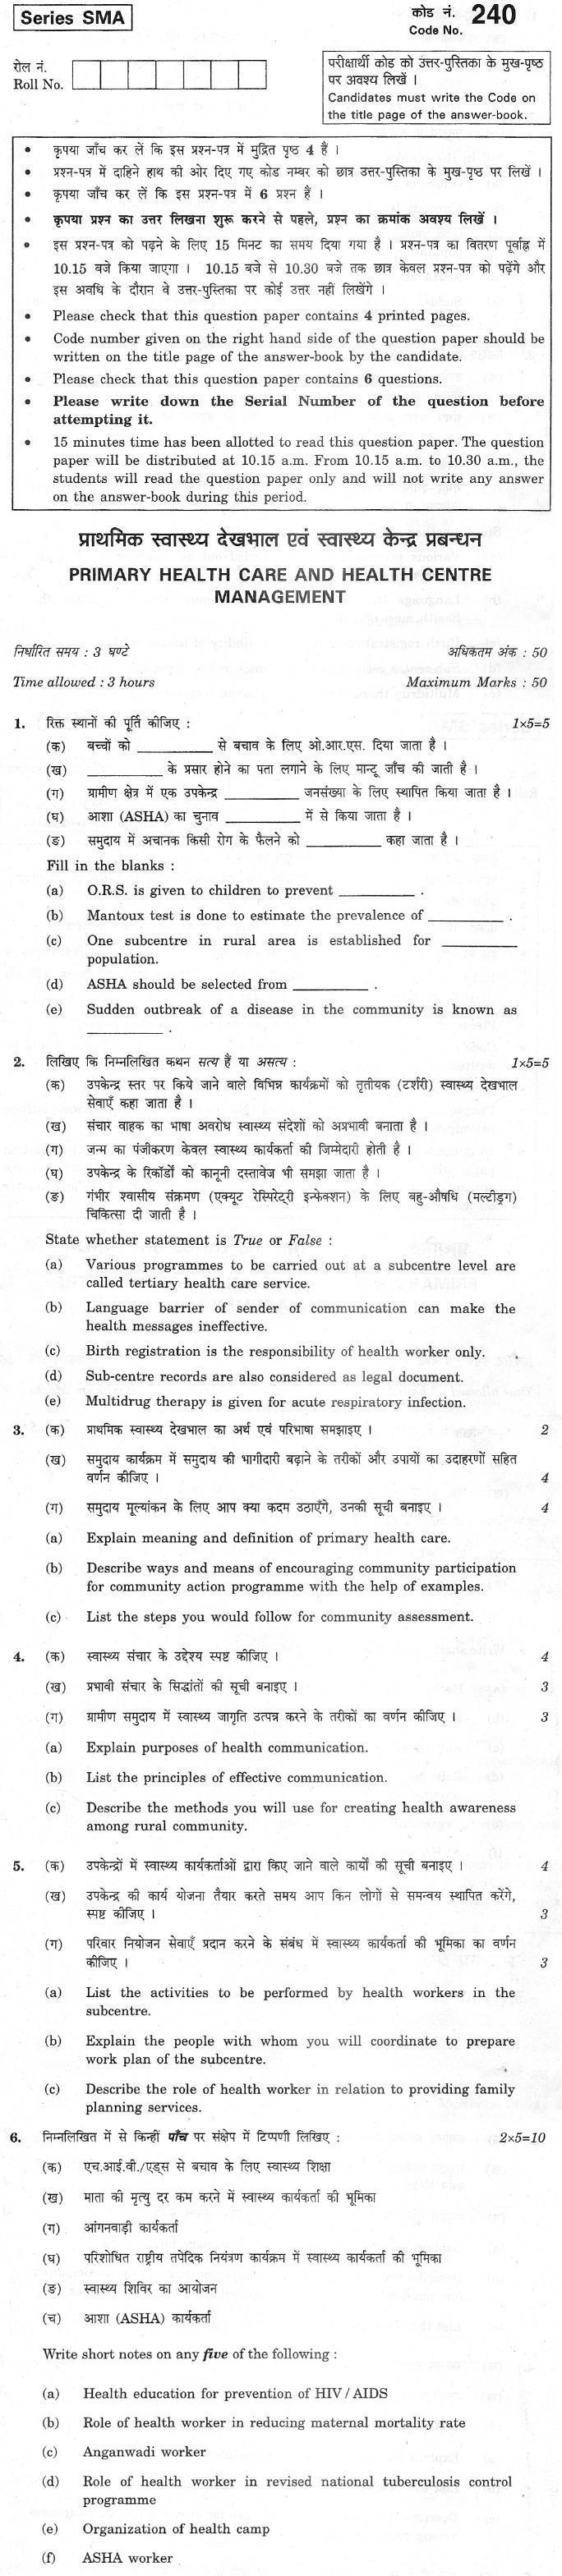 CBSE Class XII Previous Year Question Paper 2012 Primary Health Care and Health Centre management